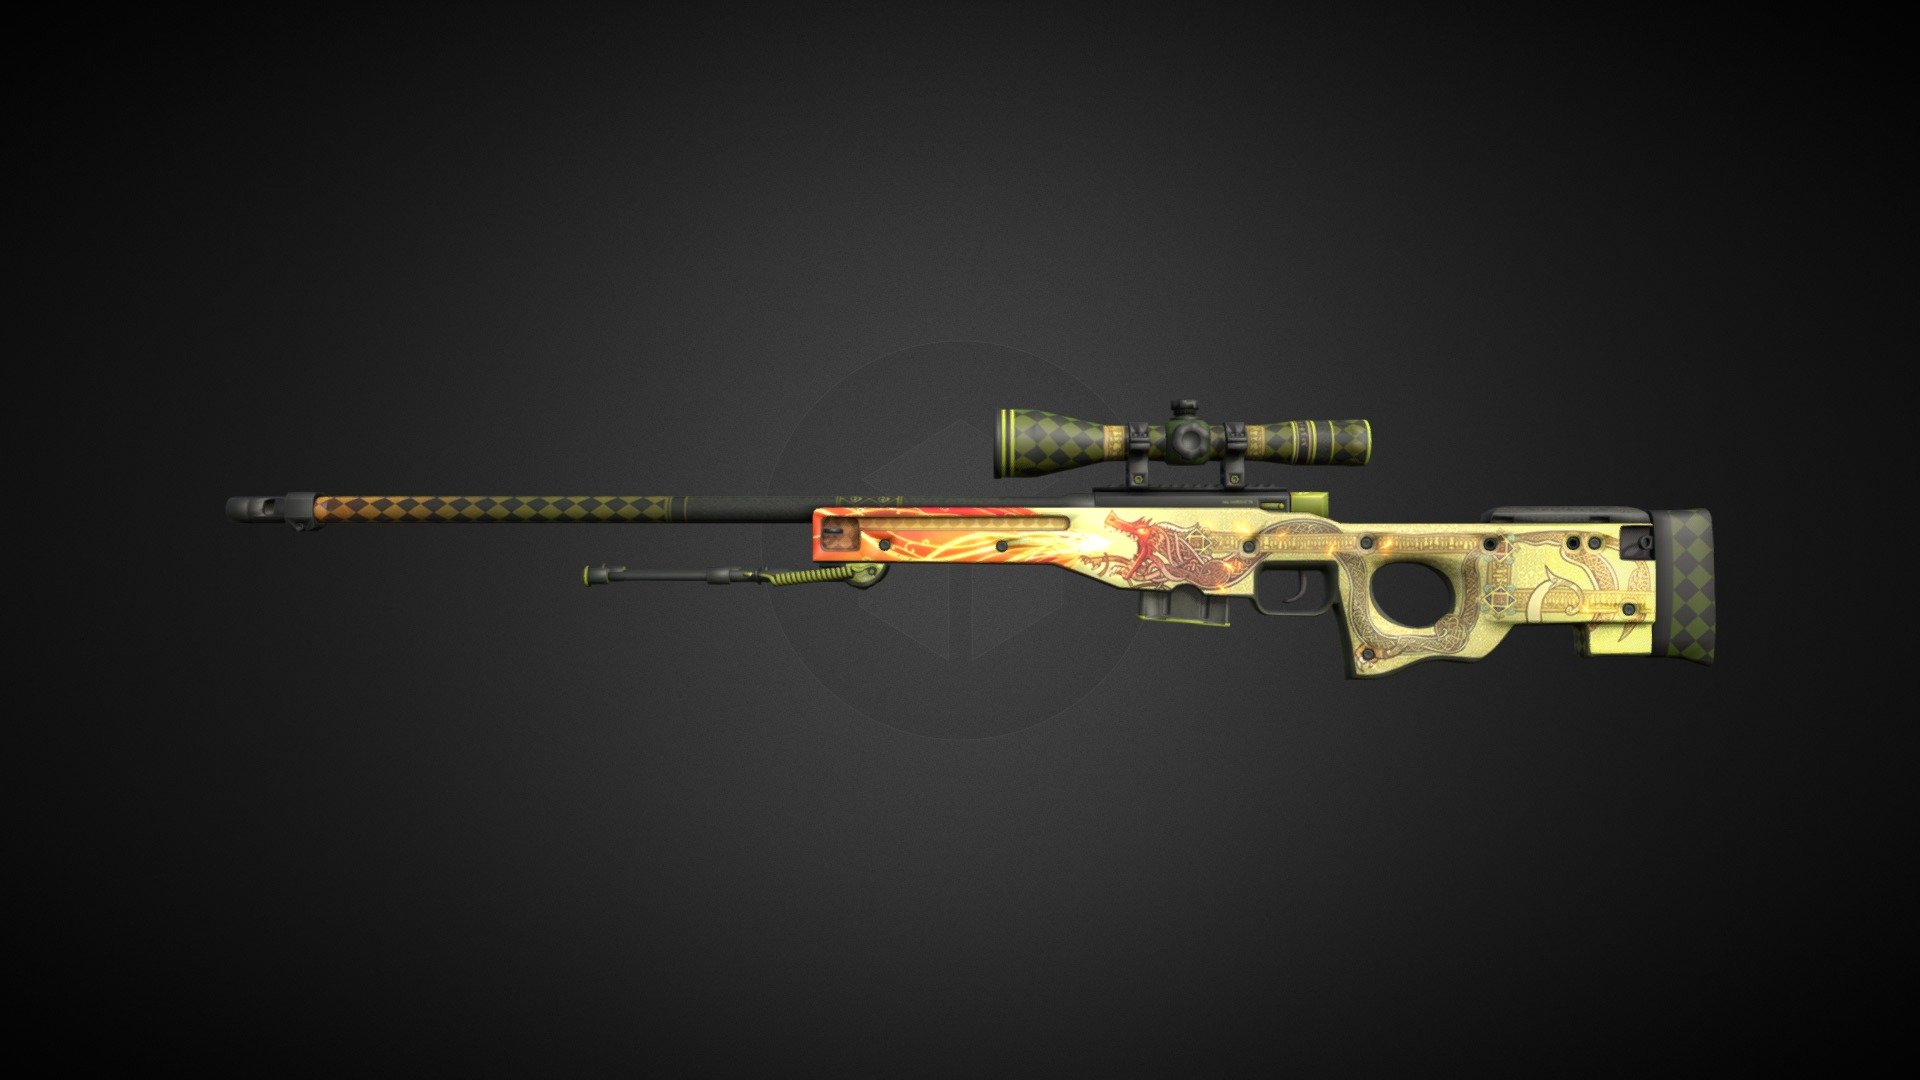 Awp cannons kg tr фото 28